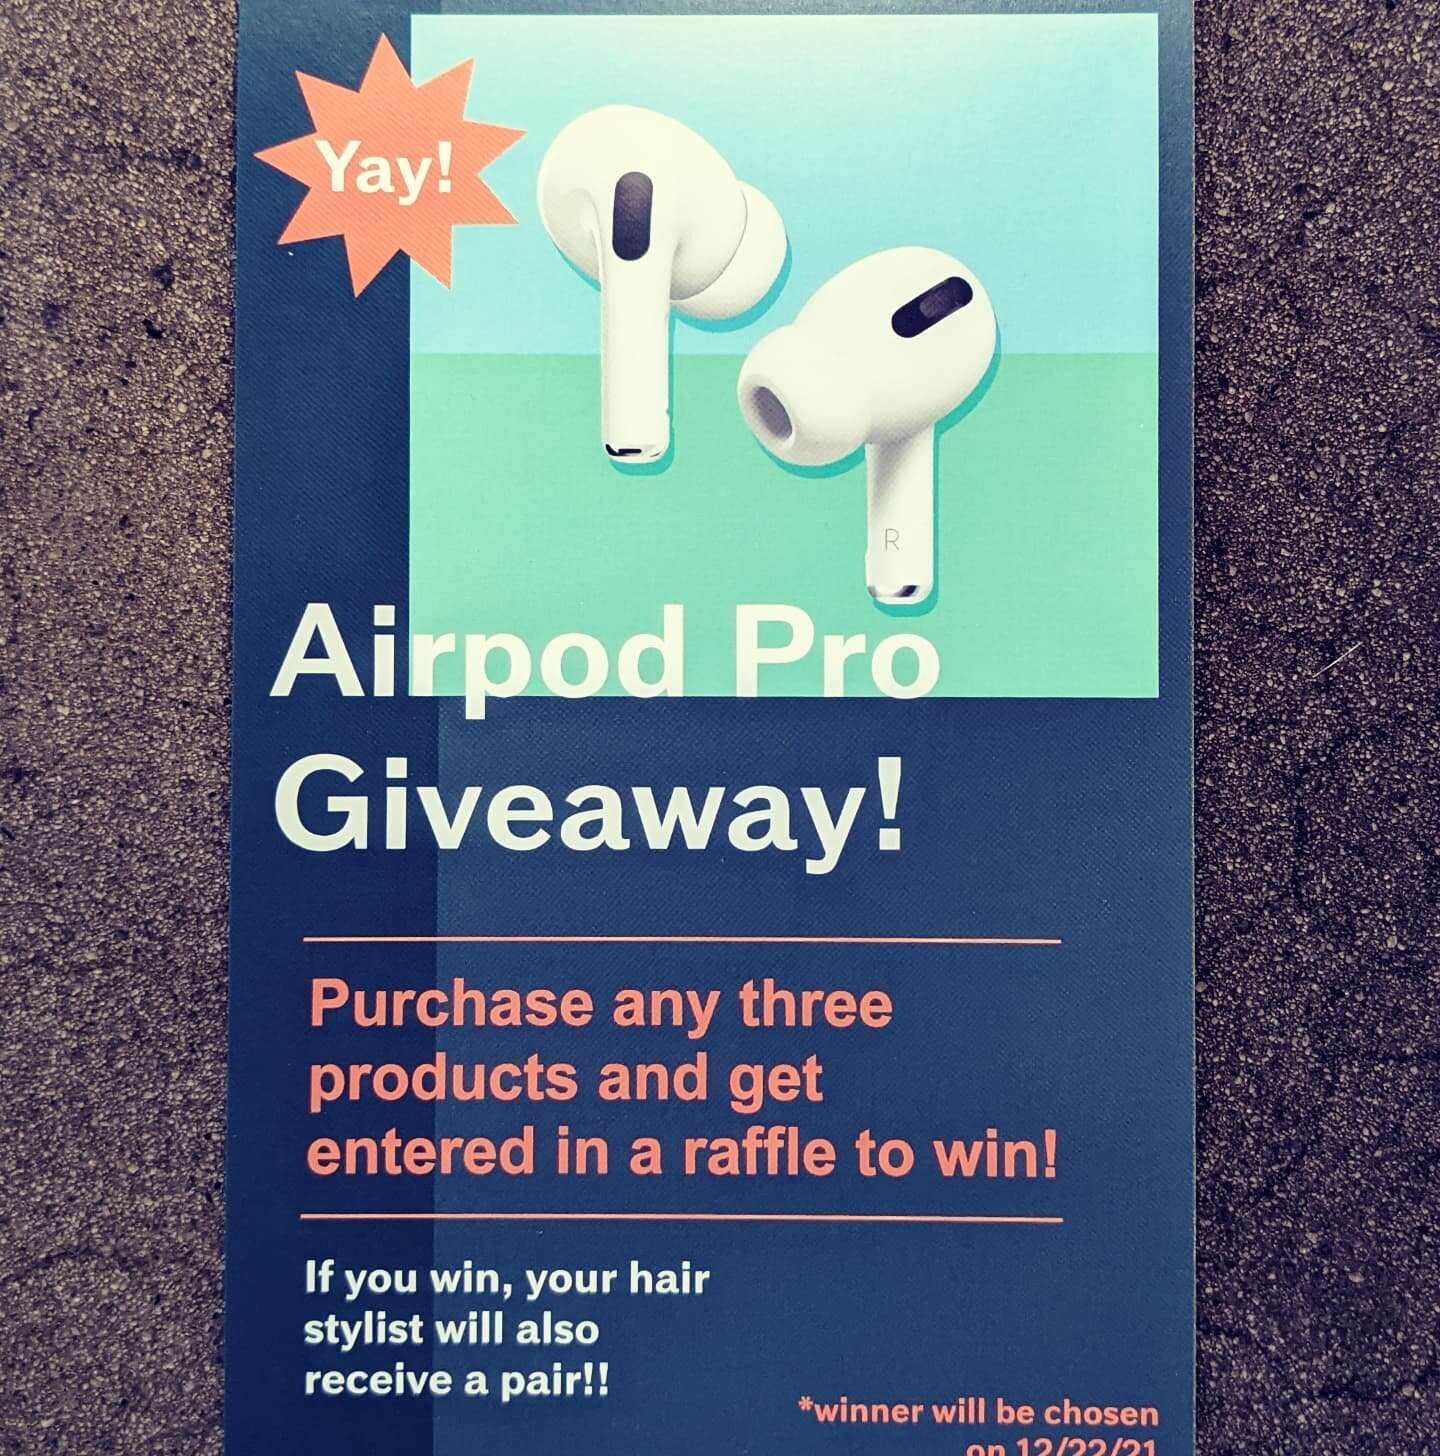 Contest ends 12/22/21
*Products must be purchased in store
.
#contest #promotion #airpodspro #durhamsalon #chapelhill #durhamnc